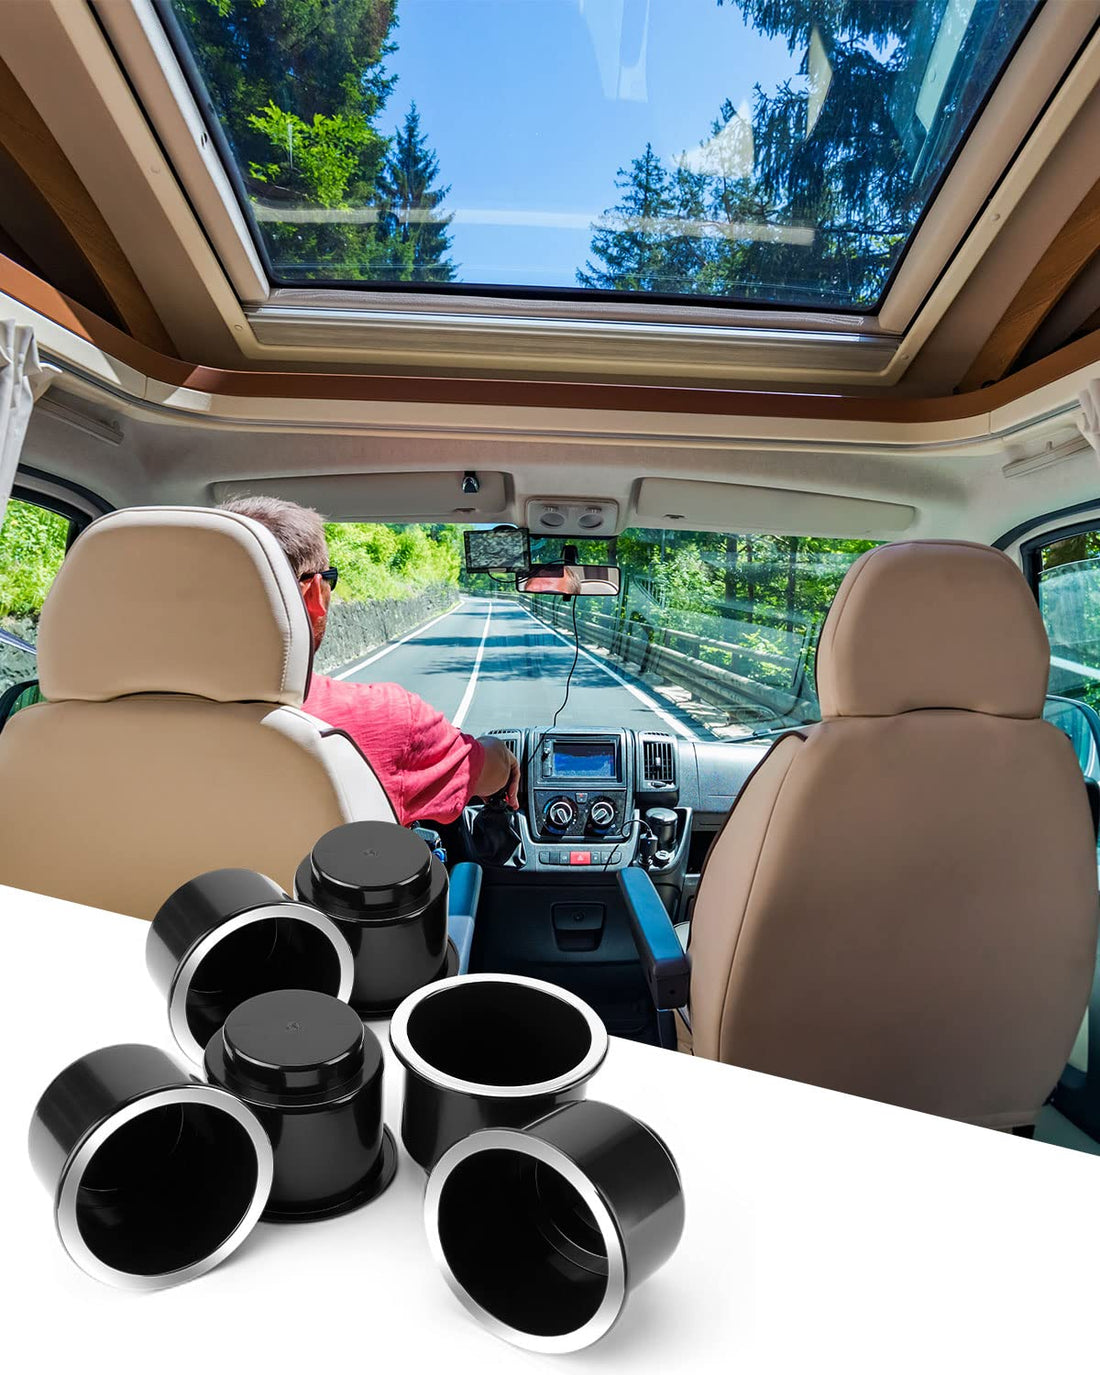 Cup Holder Insert Universal for RV Boat Car Couch Golf Cart, Pontoon Table Sofa